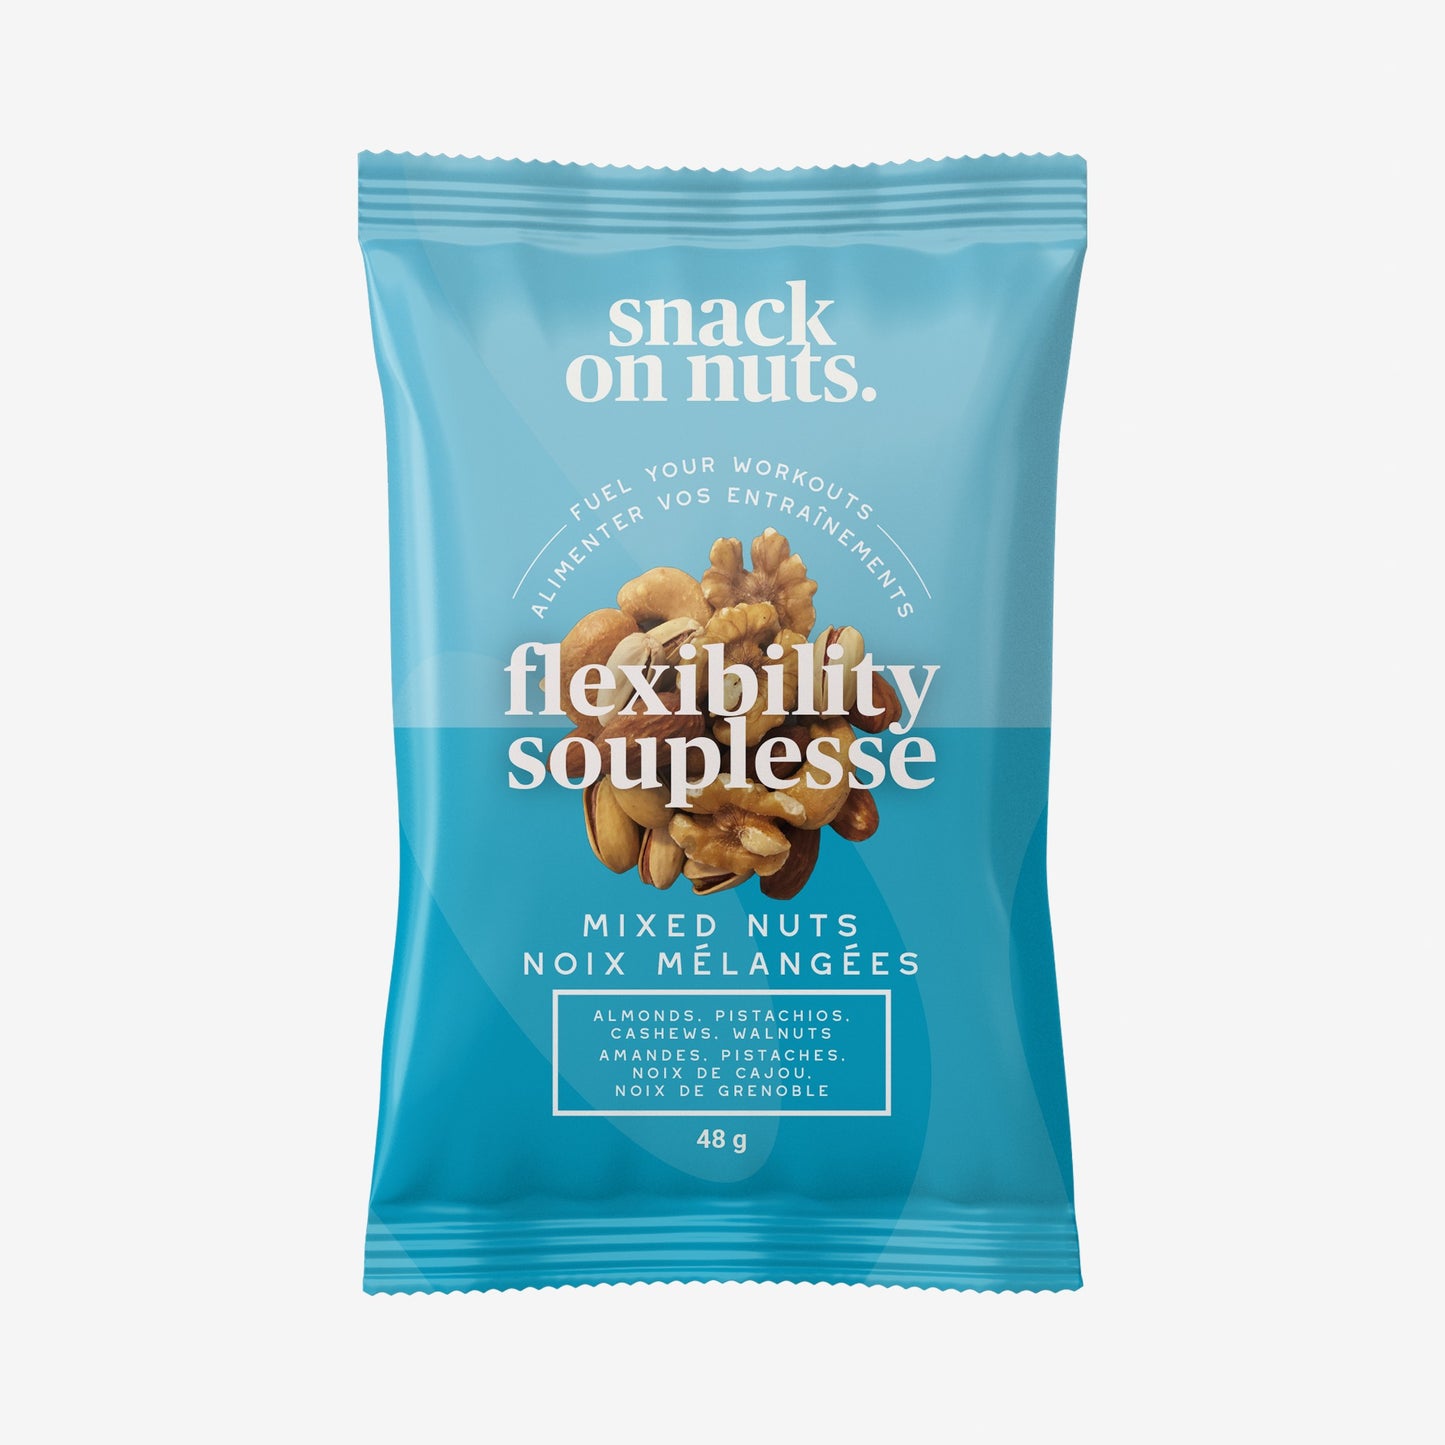 Snack On Nuts - Flexibility Mixed Nuts Single Pack (48g) - Easy Snacks: Roasted Almonds, Cashews, Pistachios, and Raw Walnuts